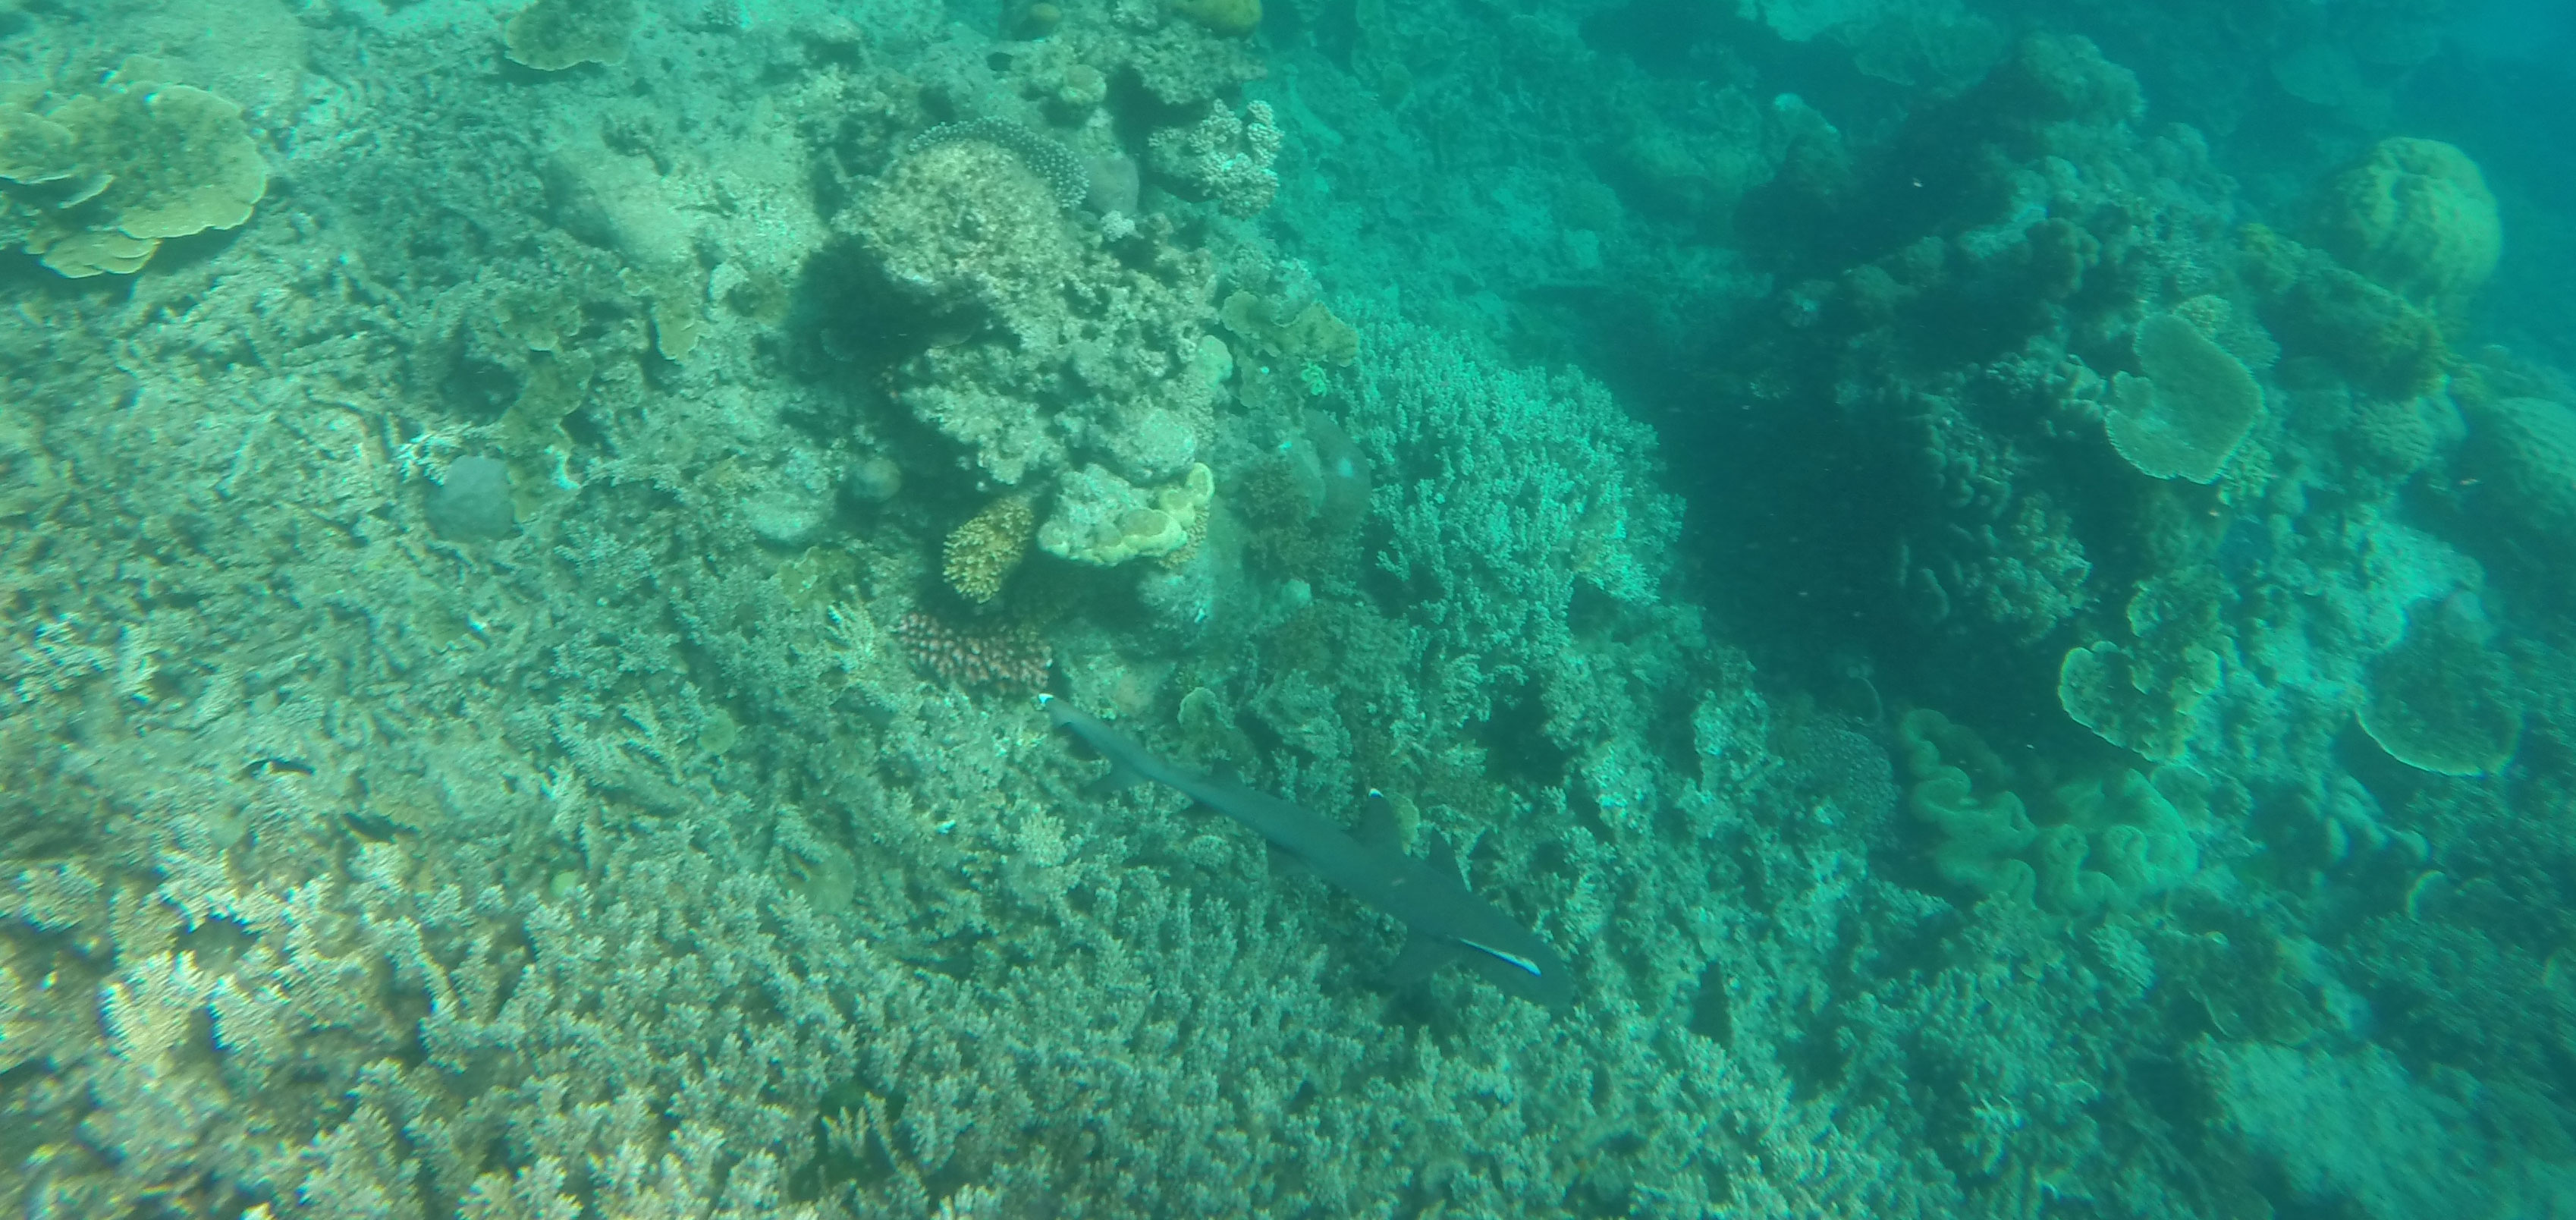 Snorkelling The Great Barrier Reef